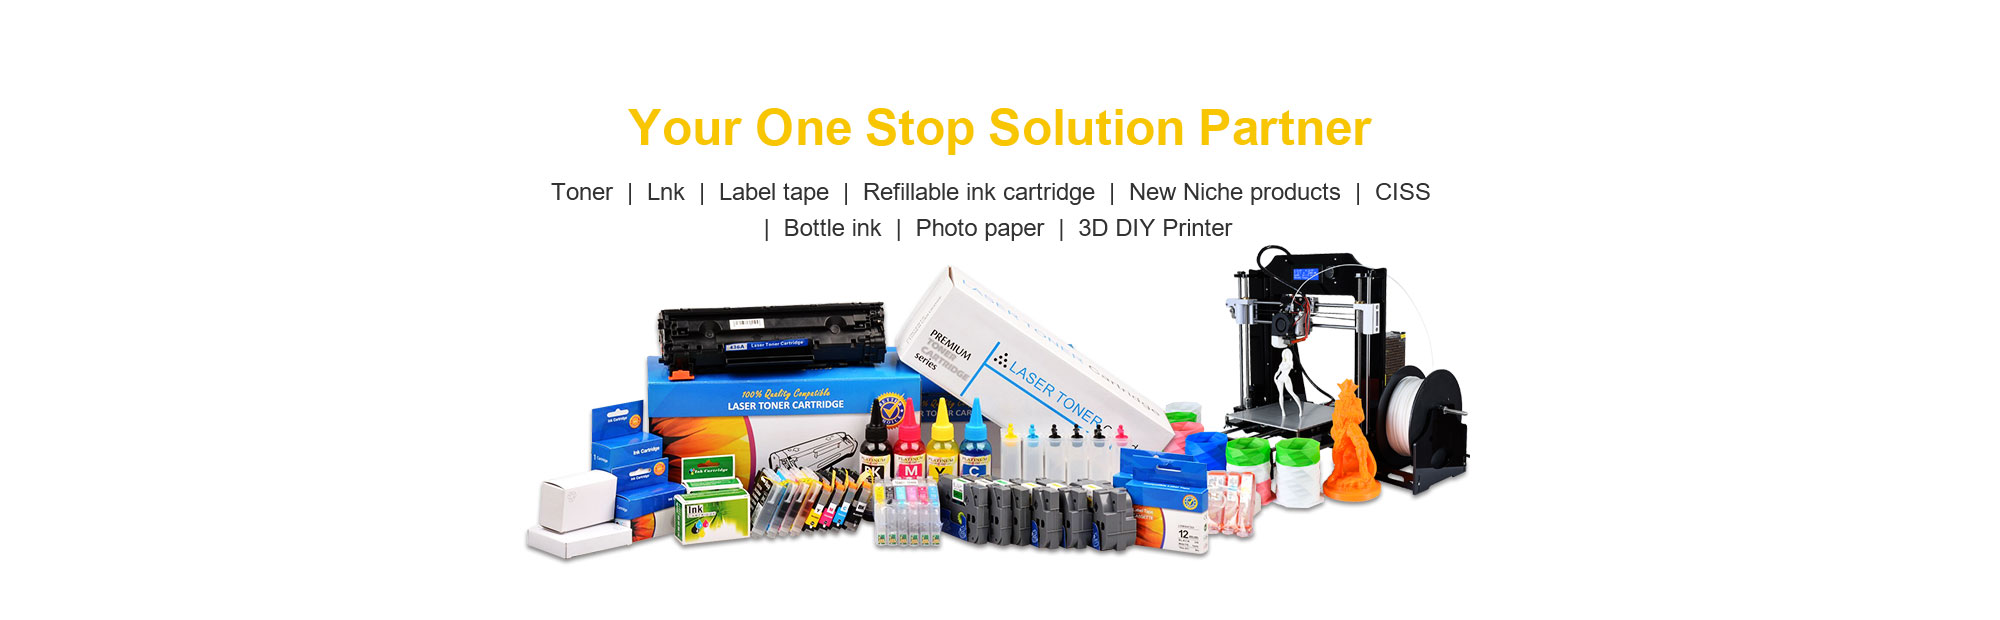 Compatible Ink Cartridge for HP 970/971XL